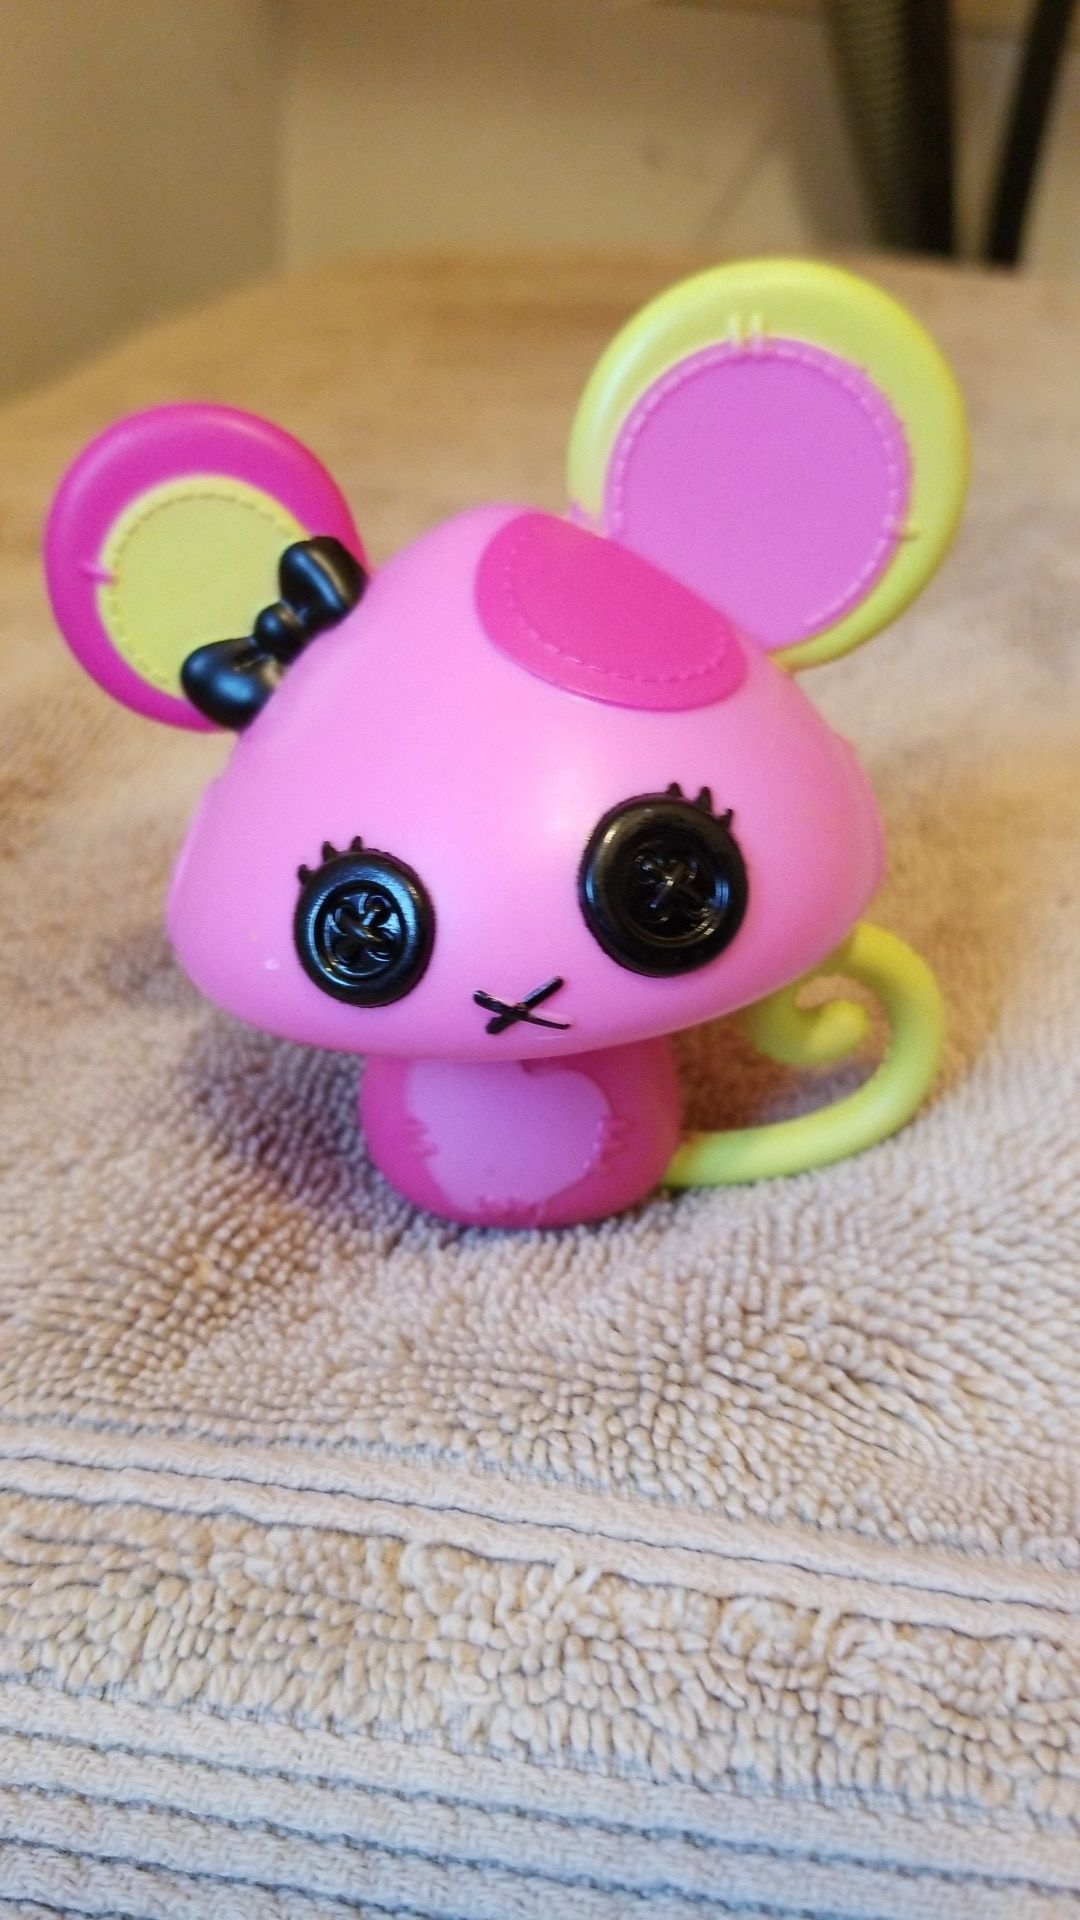 Lalaloopsy big doll pet mouse 3" tall, One ear is Pink and light green